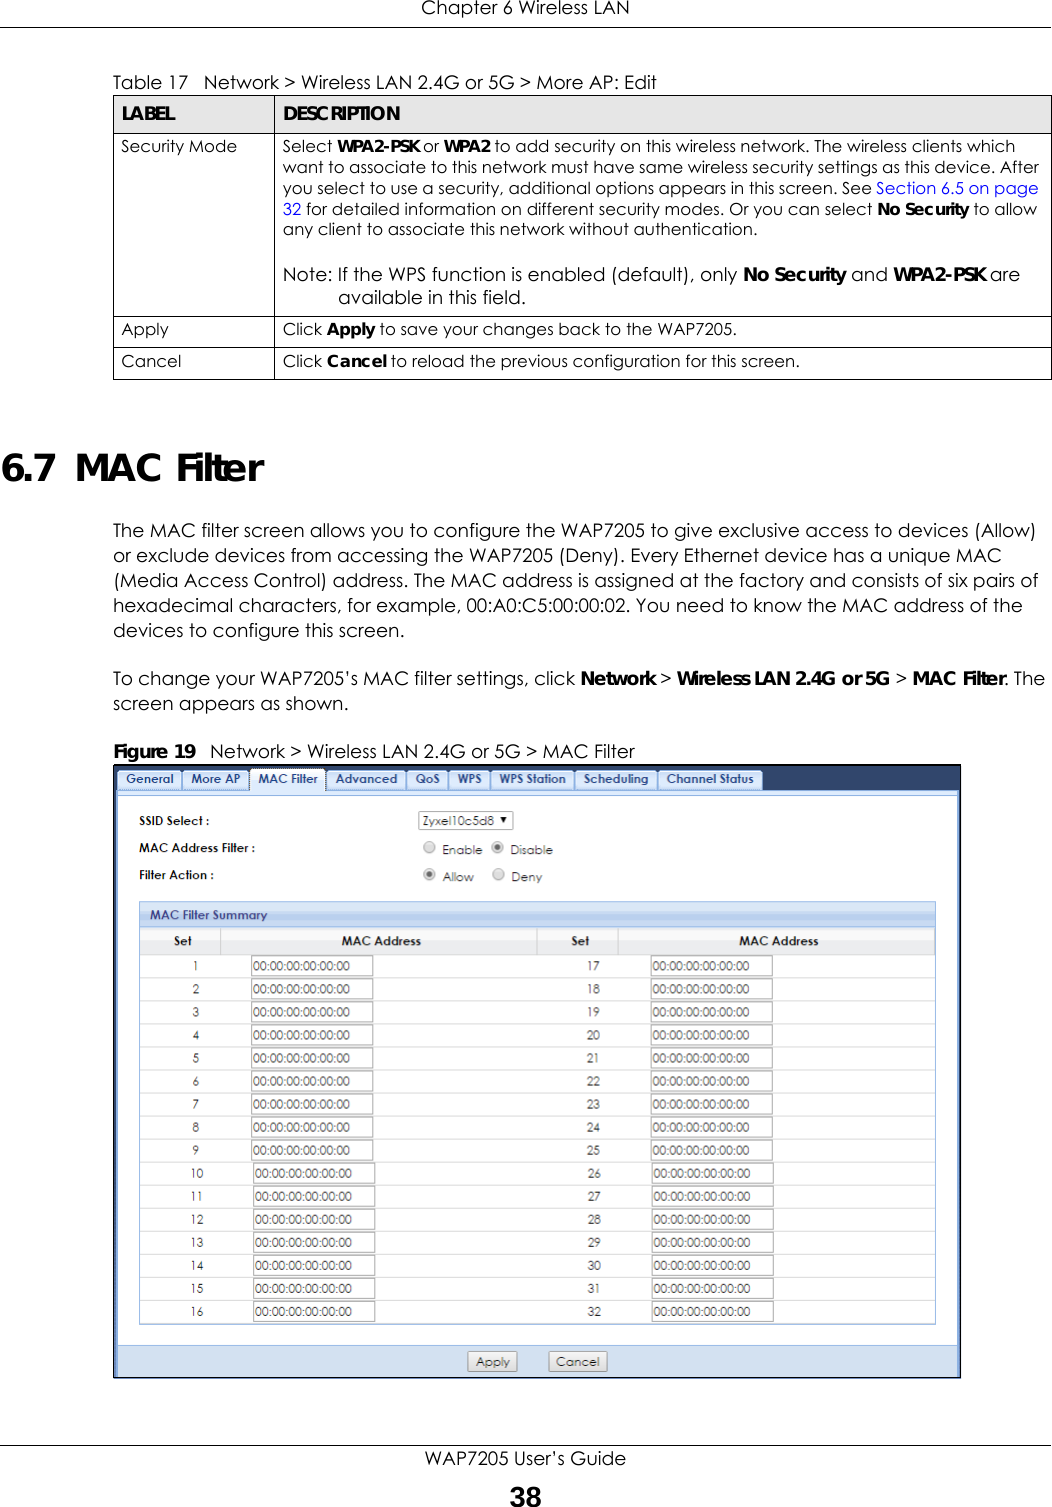 Chapter 6 Wireless LANWAP7205 User’s Guide386.7  MAC FilterThe MAC filter screen allows you to configure the WAP7205 to give exclusive access to devices (Allow) or exclude devices from accessing the WAP7205 (Deny). Every Ethernet device has a unique MAC (Media Access Control) address. The MAC address is assigned at the factory and consists of six pairs of hexadecimal characters, for example, 00:A0:C5:00:00:02. You need to know the MAC address of the devices to configure this screen.To change your WAP7205’s MAC filter settings, click Network &gt; Wireless LAN 2.4G or 5G &gt; MAC Filter. The screen appears as shown.Figure 19   Network &gt; Wireless LAN 2.4G or 5G &gt; MAC FilterSecurity Mode Select WPA2-PSK or WPA2 to add security on this wireless network. The wireless clients which want to associate to this network must have same wireless security settings as this device. After you select to use a security, additional options appears in this screen. See Section 6.5 on page 32 for detailed information on different security modes. Or you can select No Security to allow any client to associate this network without authentication.Note: If the WPS function is enabled (default), only No Security and WPA2-PSK are available in this field.Apply Click Apply to save your changes back to the WAP7205.Cancel Click Cancel to reload the previous configuration for this screen.Table 17   Network &gt; Wireless LAN 2.4G or 5G &gt; More AP: EditLABEL DESCRIPTION